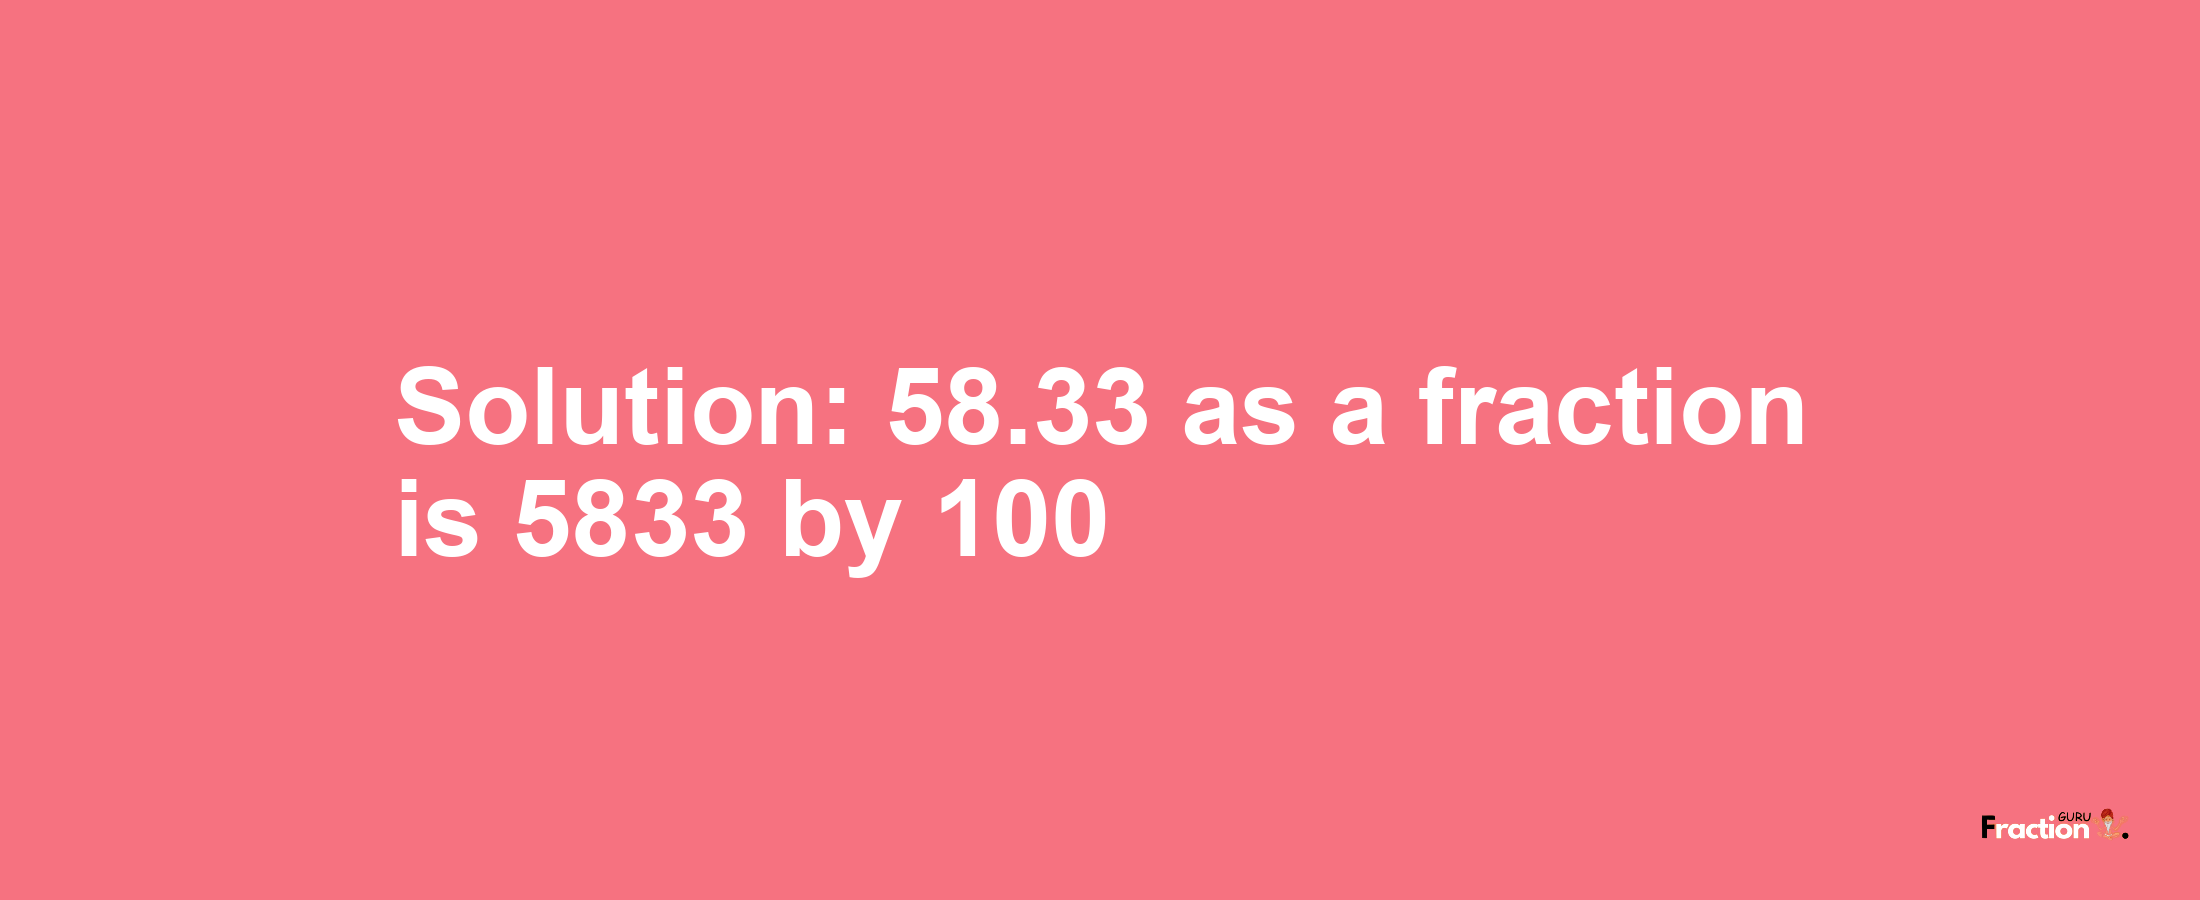 Solution:58.33 as a fraction is 5833/100